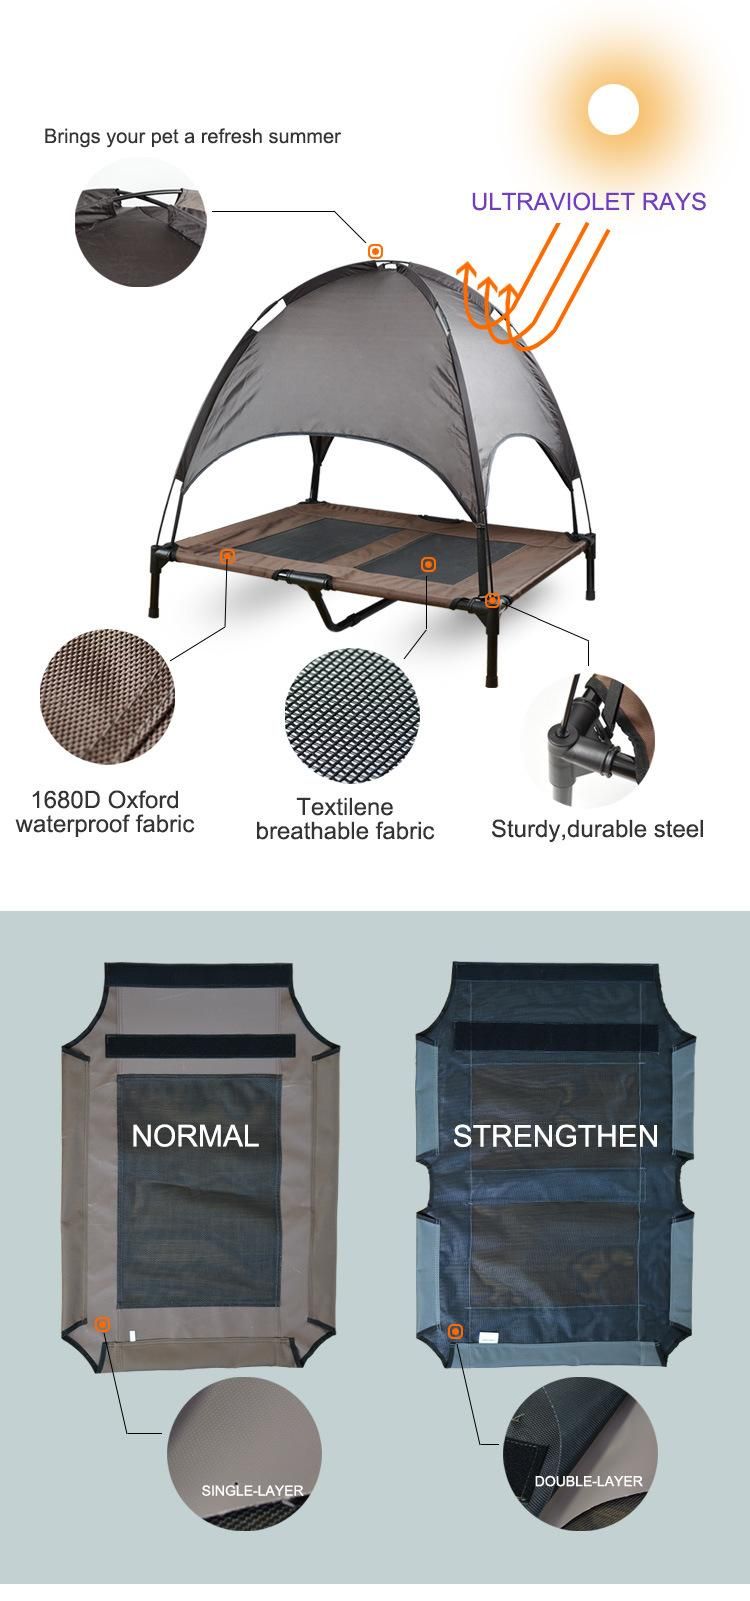 Outdoor Travel Dog Beds Elevated Pet Cot with Canopy Pet Carrier Dog Beds & Accessories for Camping